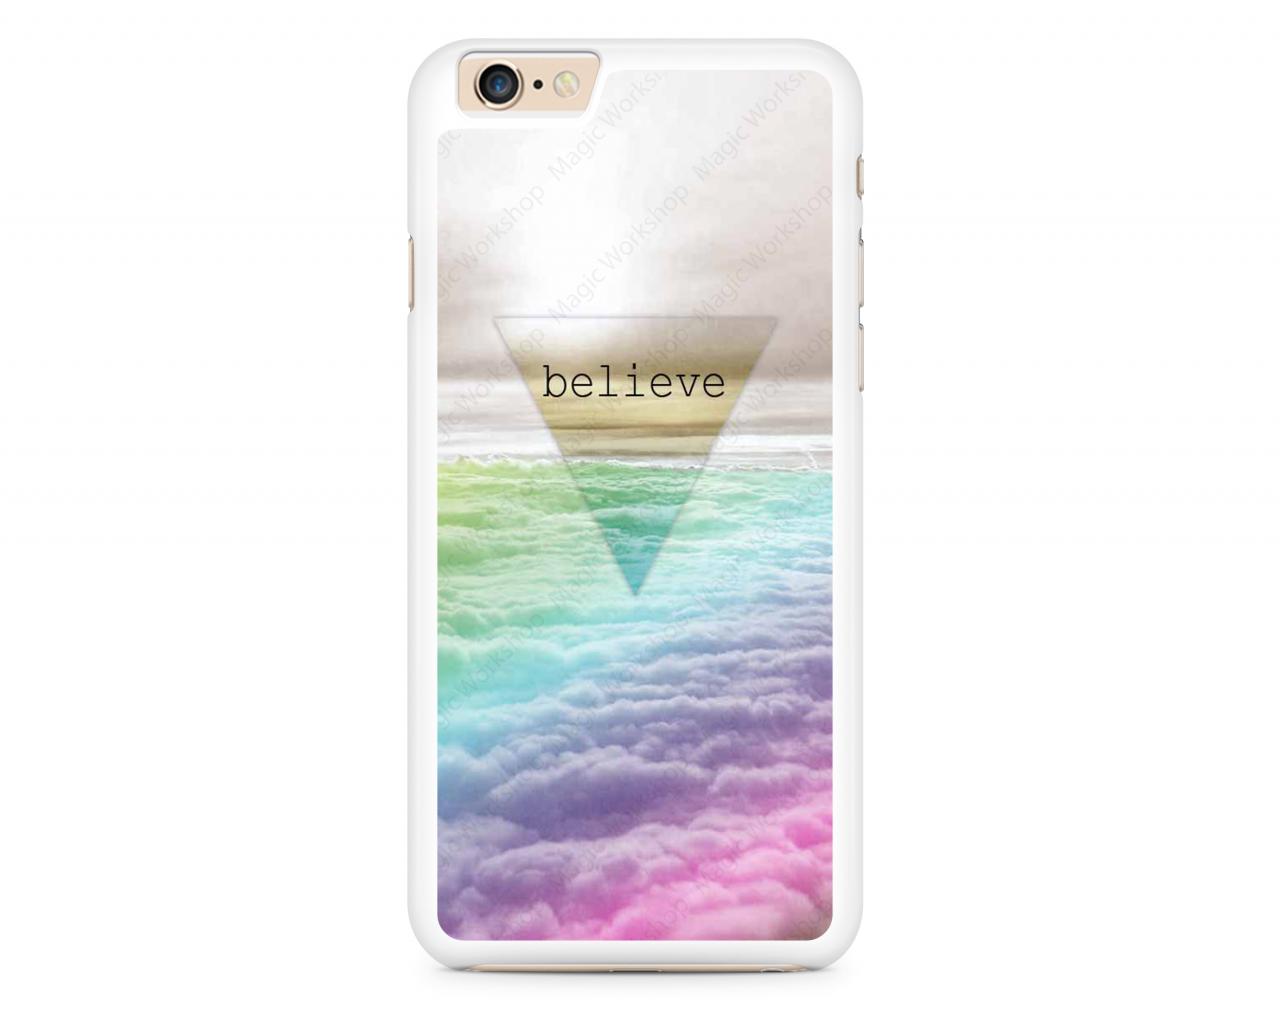 Believe, Triangle, Clouds Case For Iphone 4 4s 5 5s 5c 6 6 Plus 6s 6s Plus, Samsung Galaxy S3 S4 S5 S6 S6 Edge S7 S7 Edge Lg G3, Lg G4, Htc One